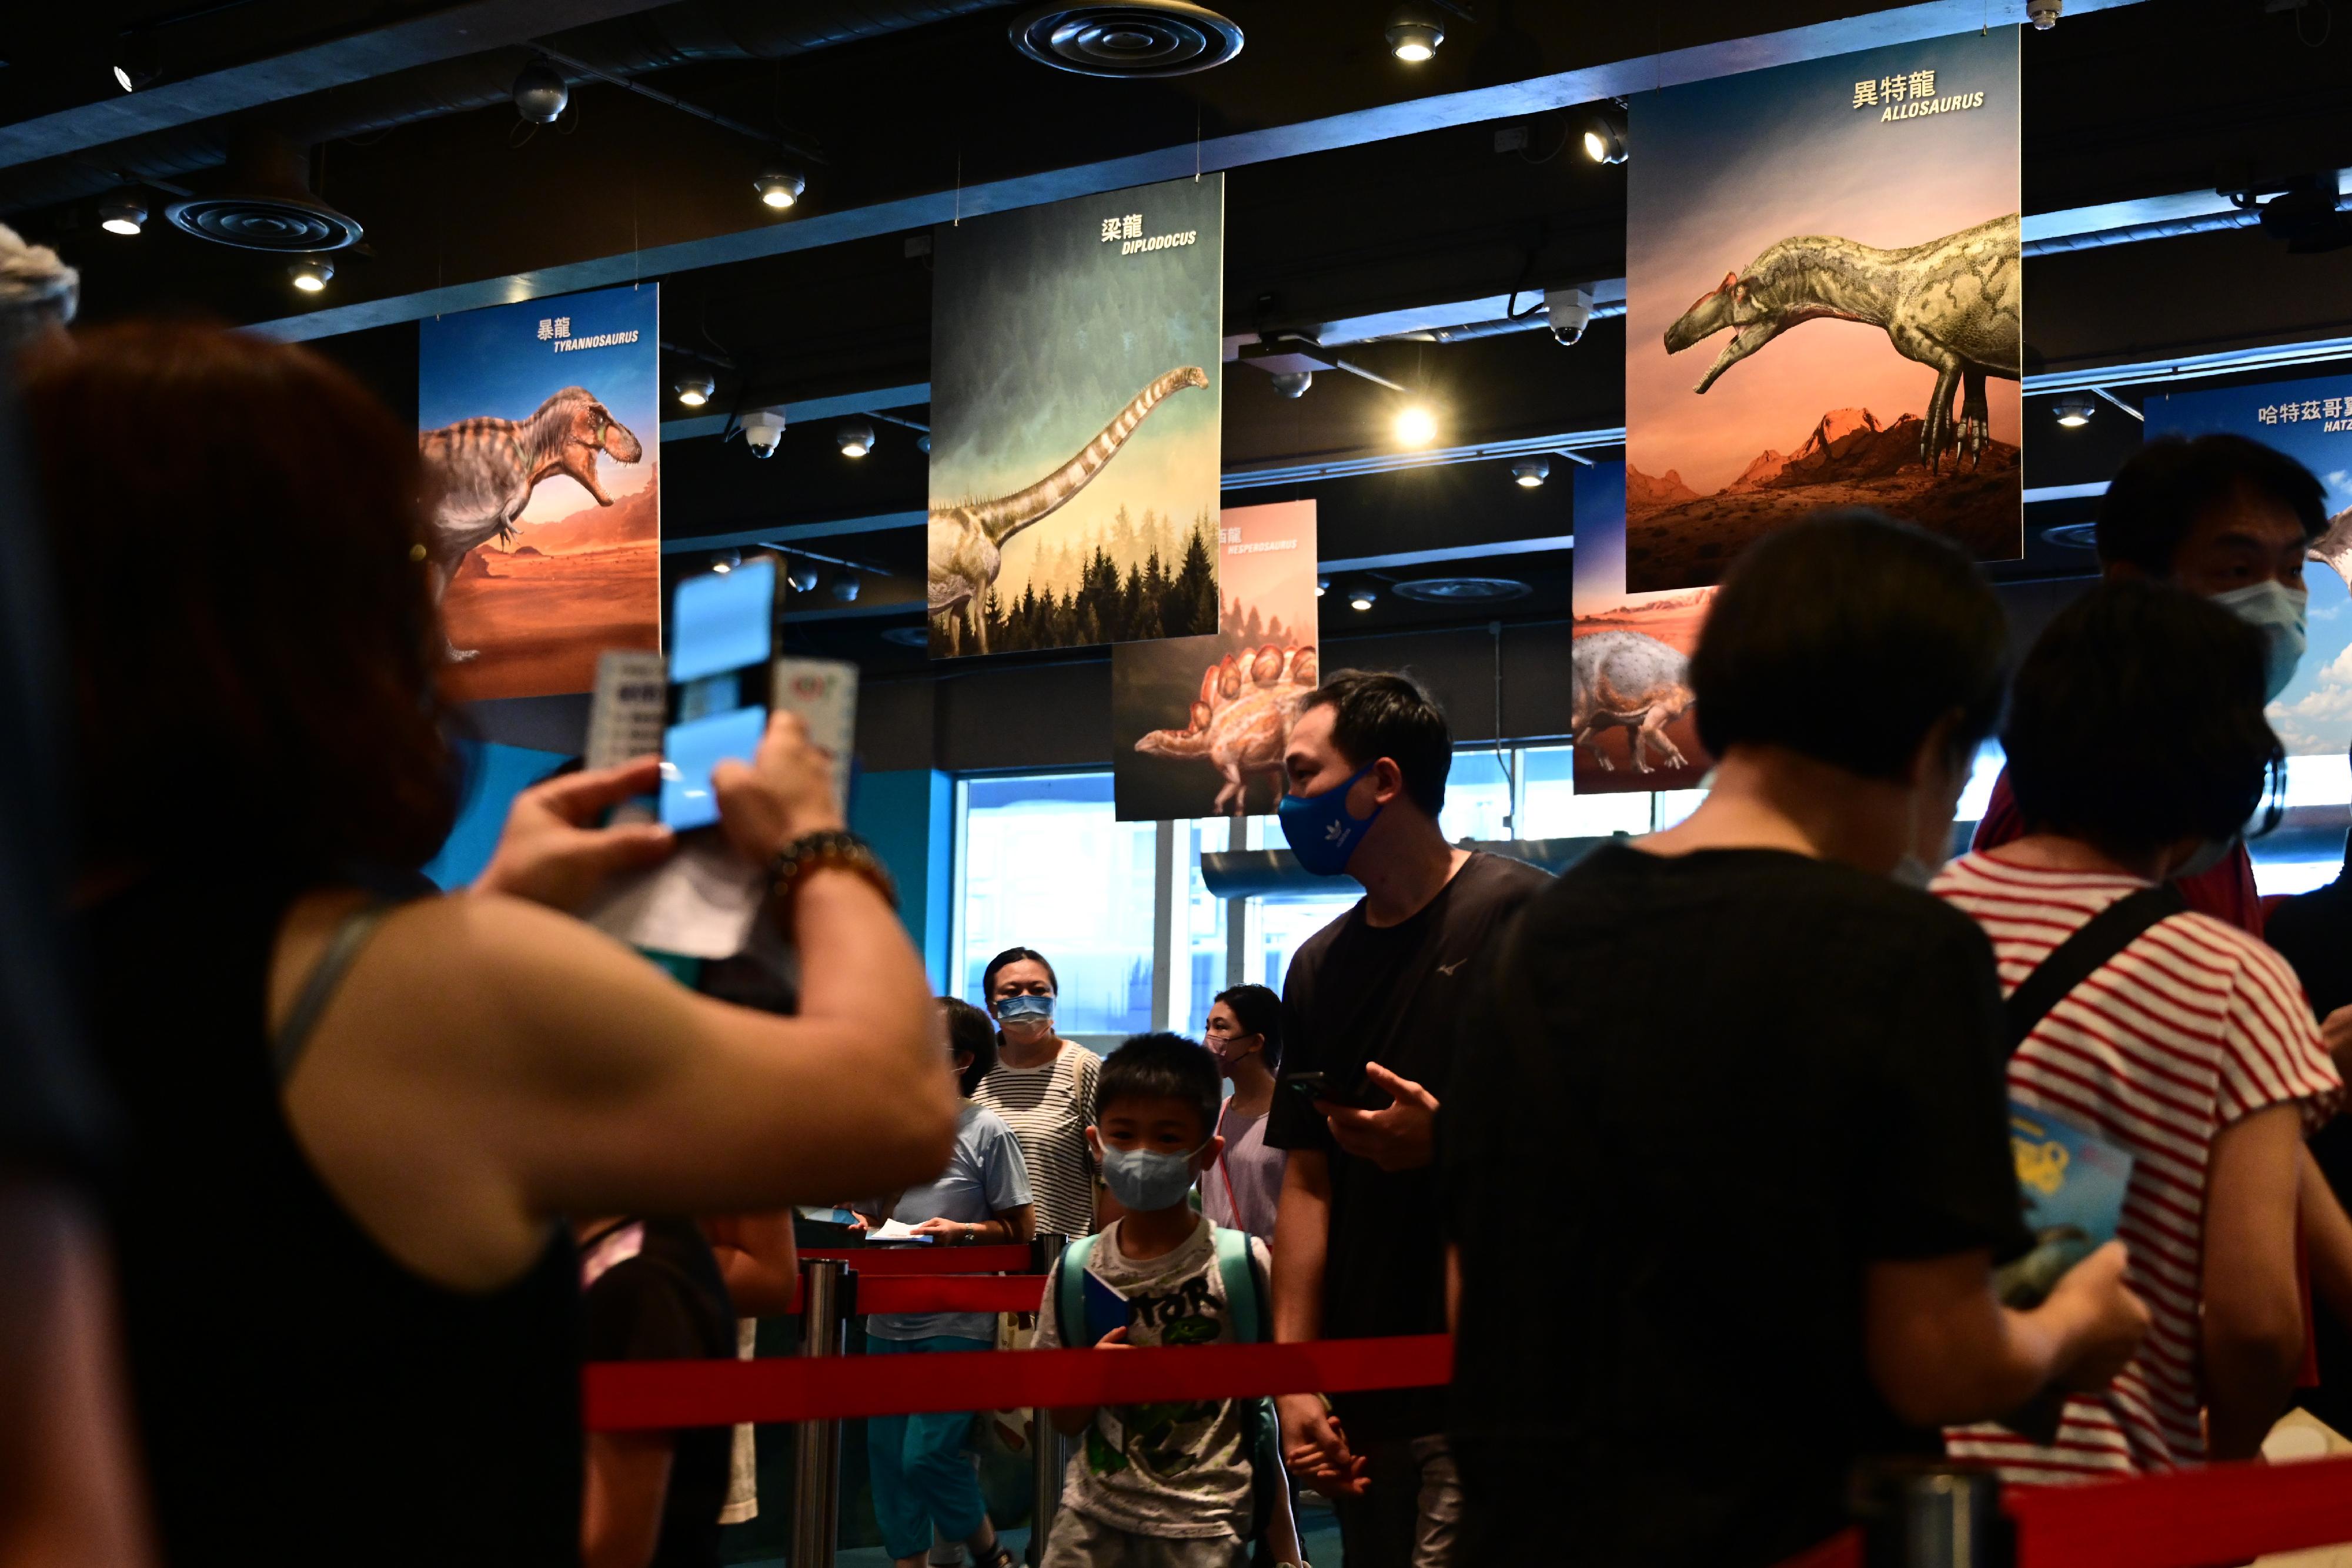 The free large-scale dinosaur exhibition "The Hong Kong Jockey Club Series: The Big Eight - Dinosaur Revelation" organised by the Hong Kong Science Museum has been receiving an overwhelming response from the public since its opening. The museum will extend the exhibition period to February 22, 2023.